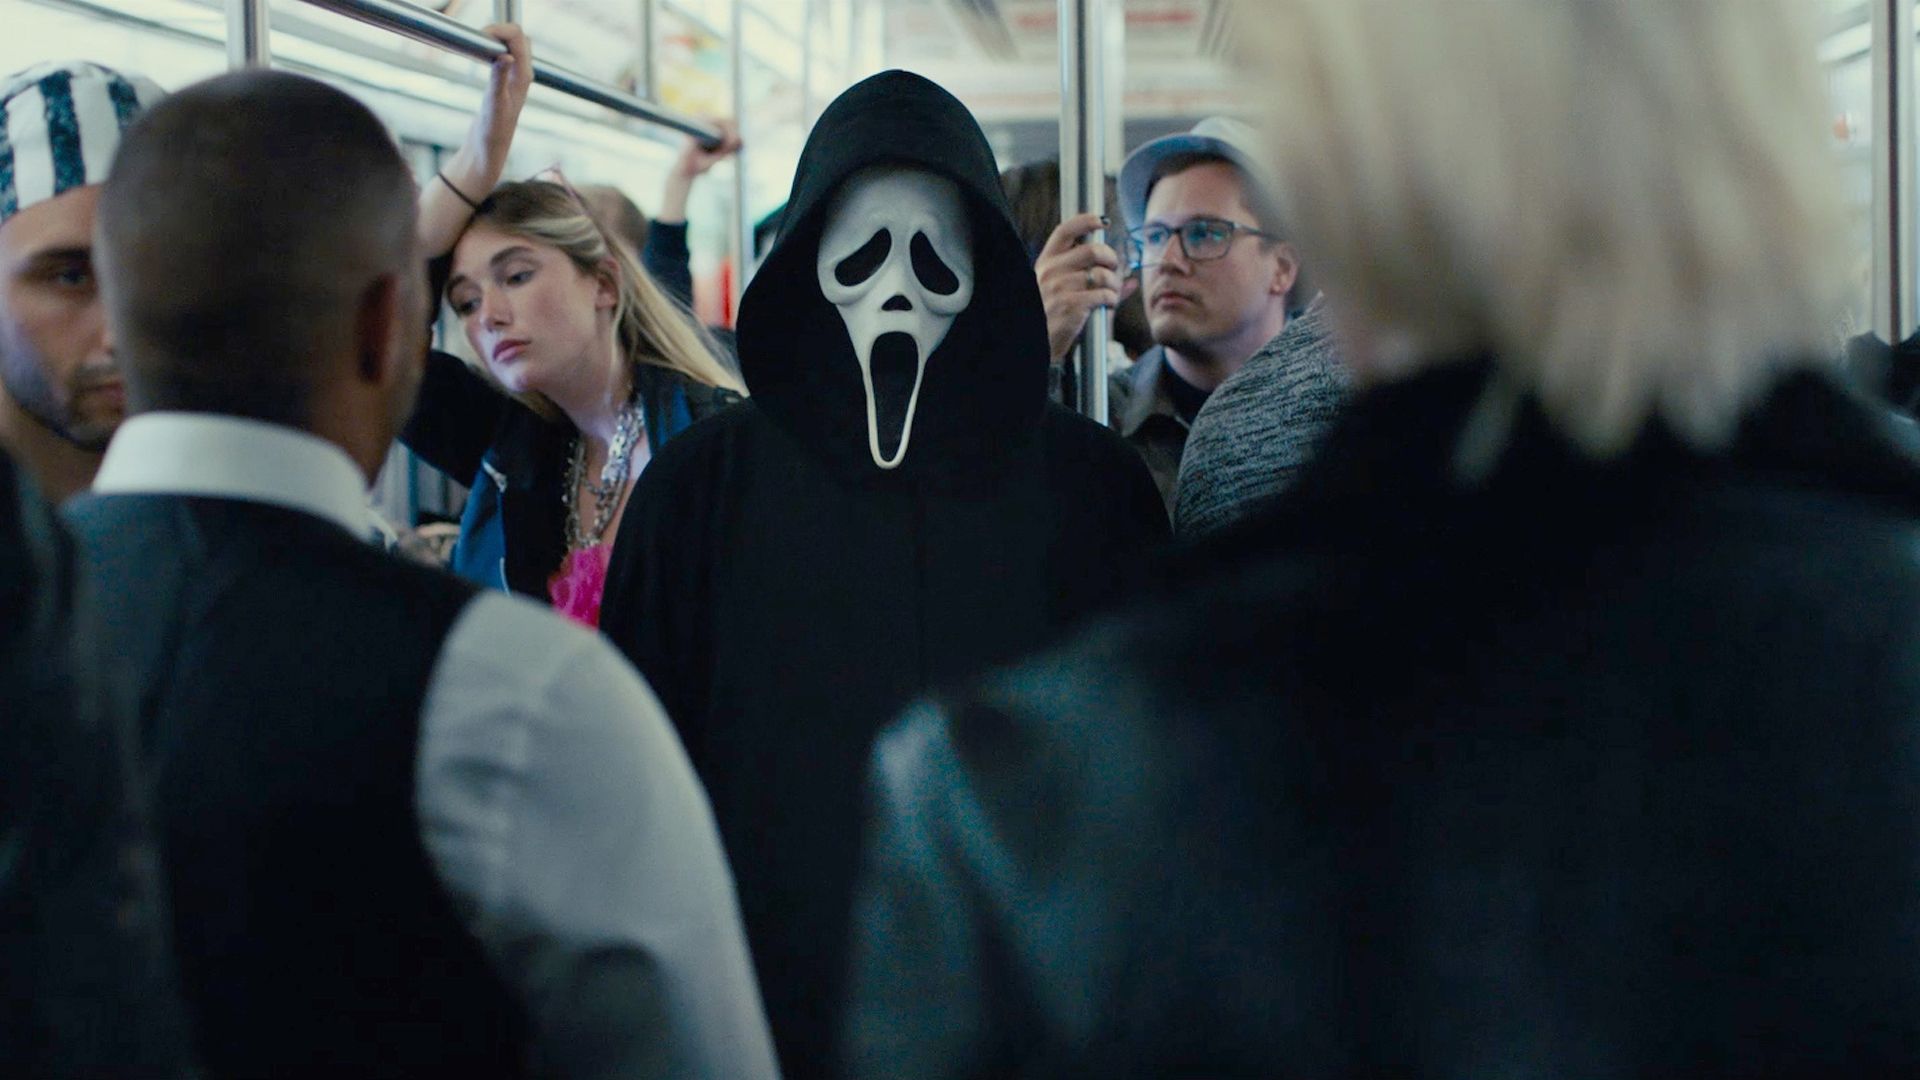 Scream 6 Has Proven to me that the Scream Franchise is the Most